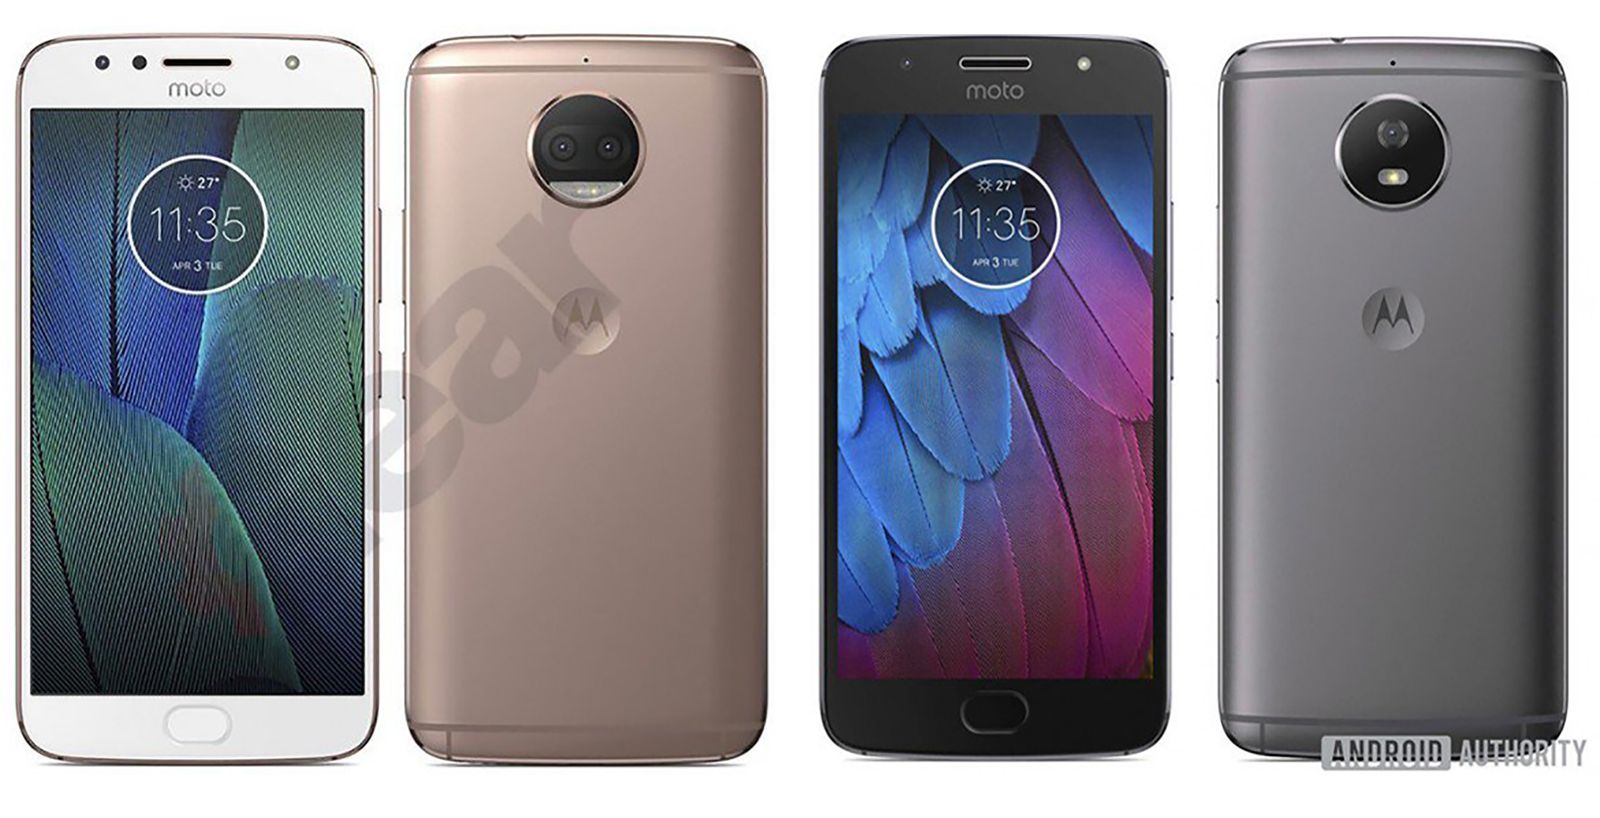 motorola moto g5s and g5s plus with dual camera on their way according to leaked photos image 1